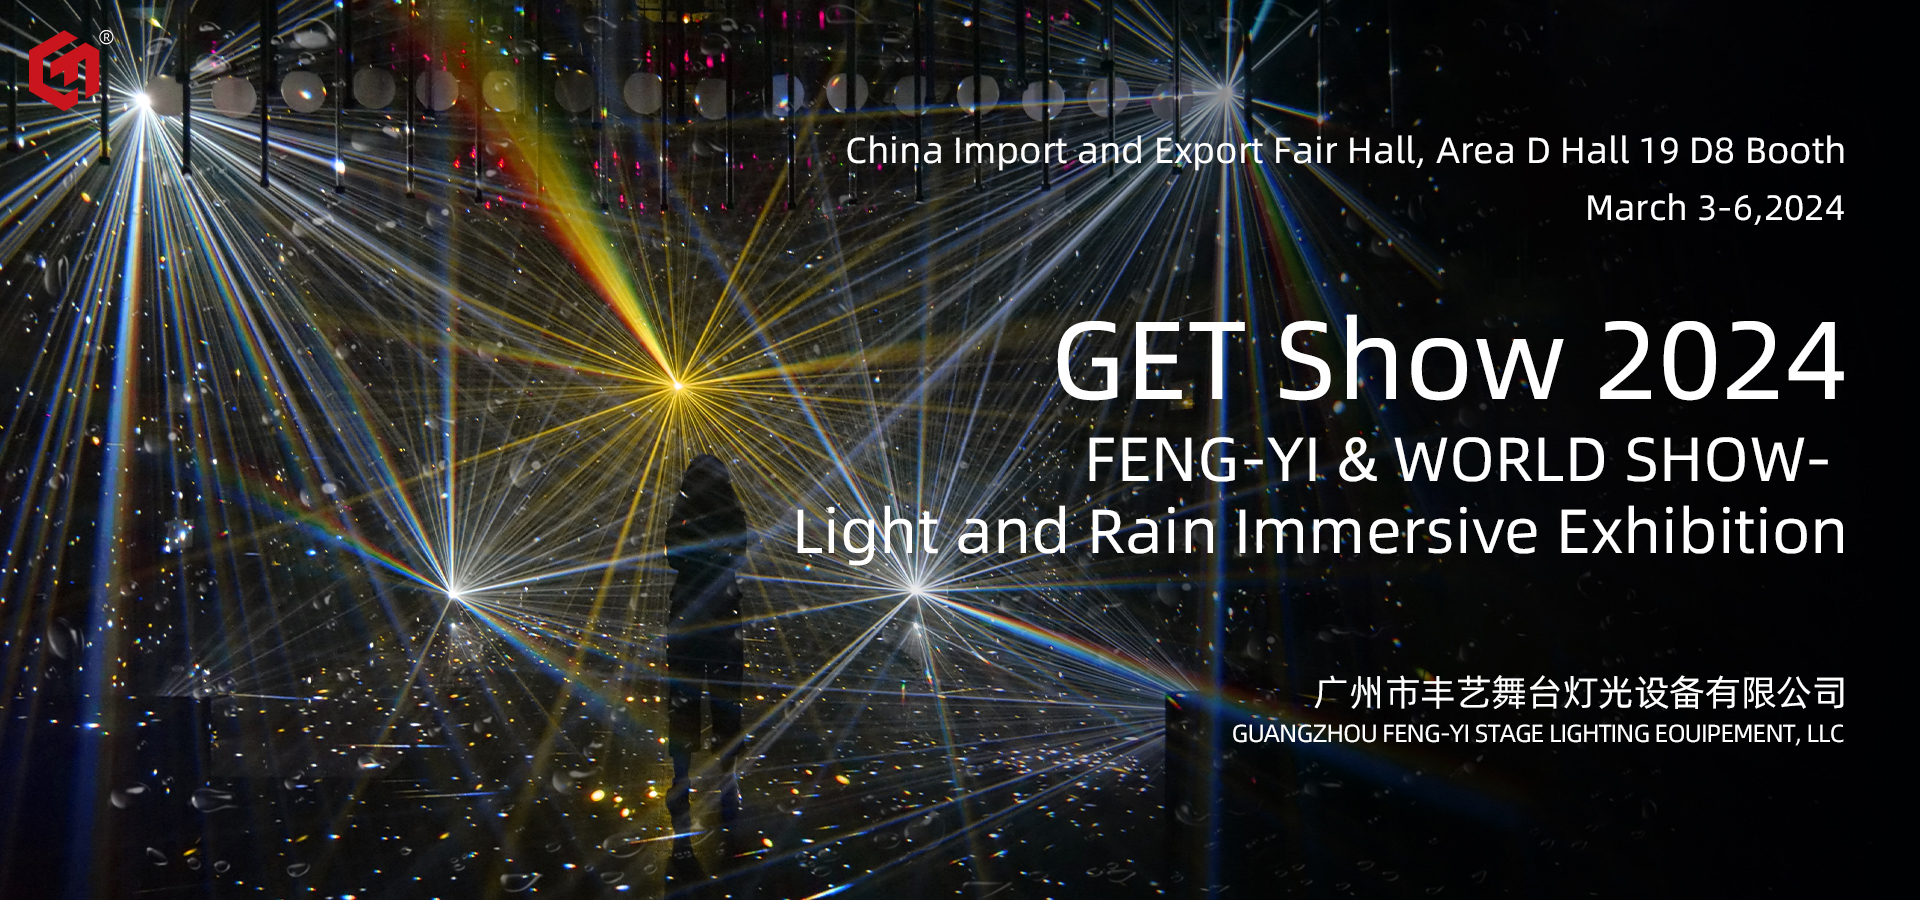 In the GET Show exhibition, DLB Kinetic lights and WORLD SHOW teamed up to create an immersive art space “Light and Rain”